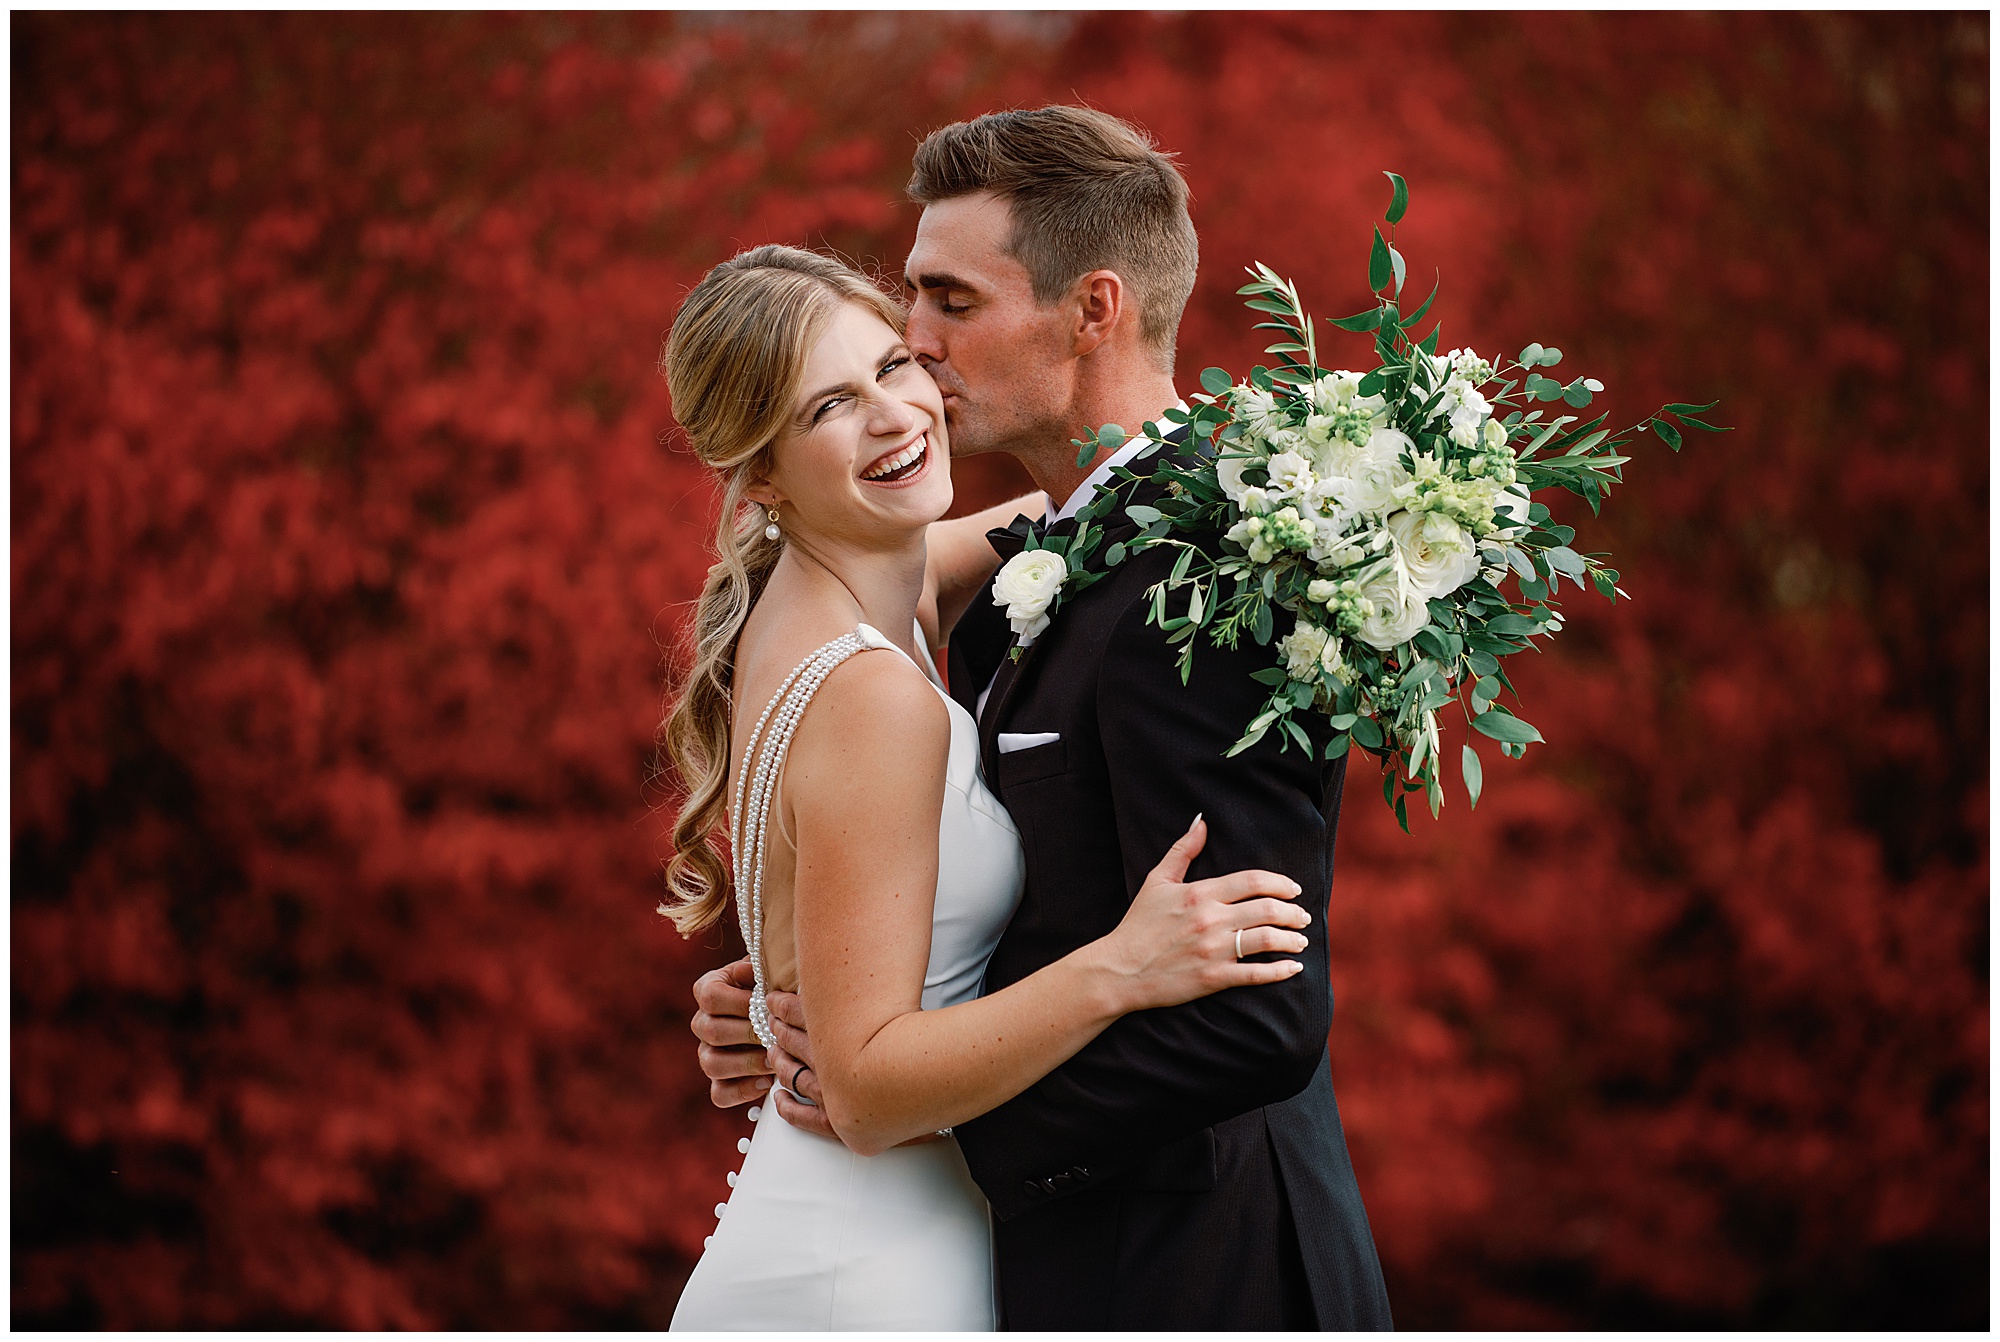 gorgeous red leaves behind bride and groom at the crest center october wedding photo by kathy beaver wedding film by Katherine Denise FIlms